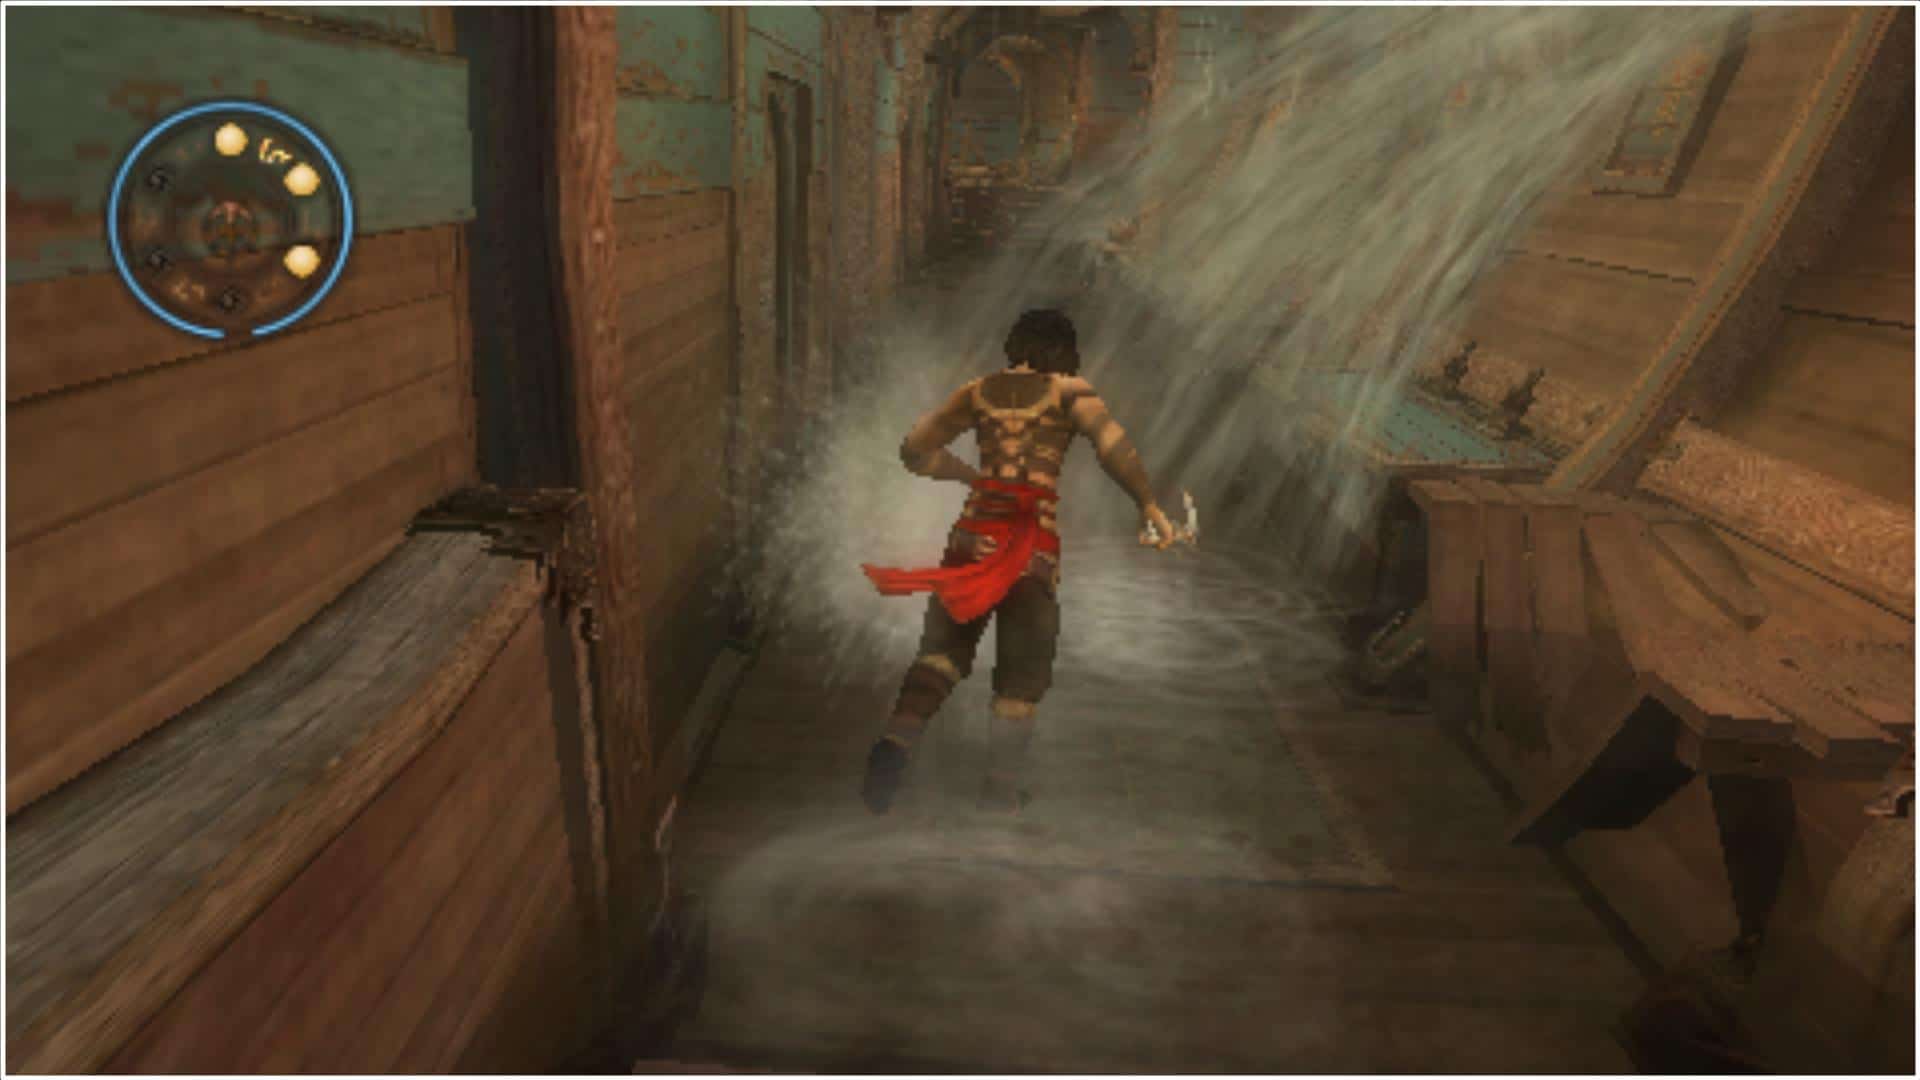 Games Compressed PC - Prince Of Persia Rival Swords Highly Compressed PSP  Game 747MB #PspGameCompressed Download Now 👇